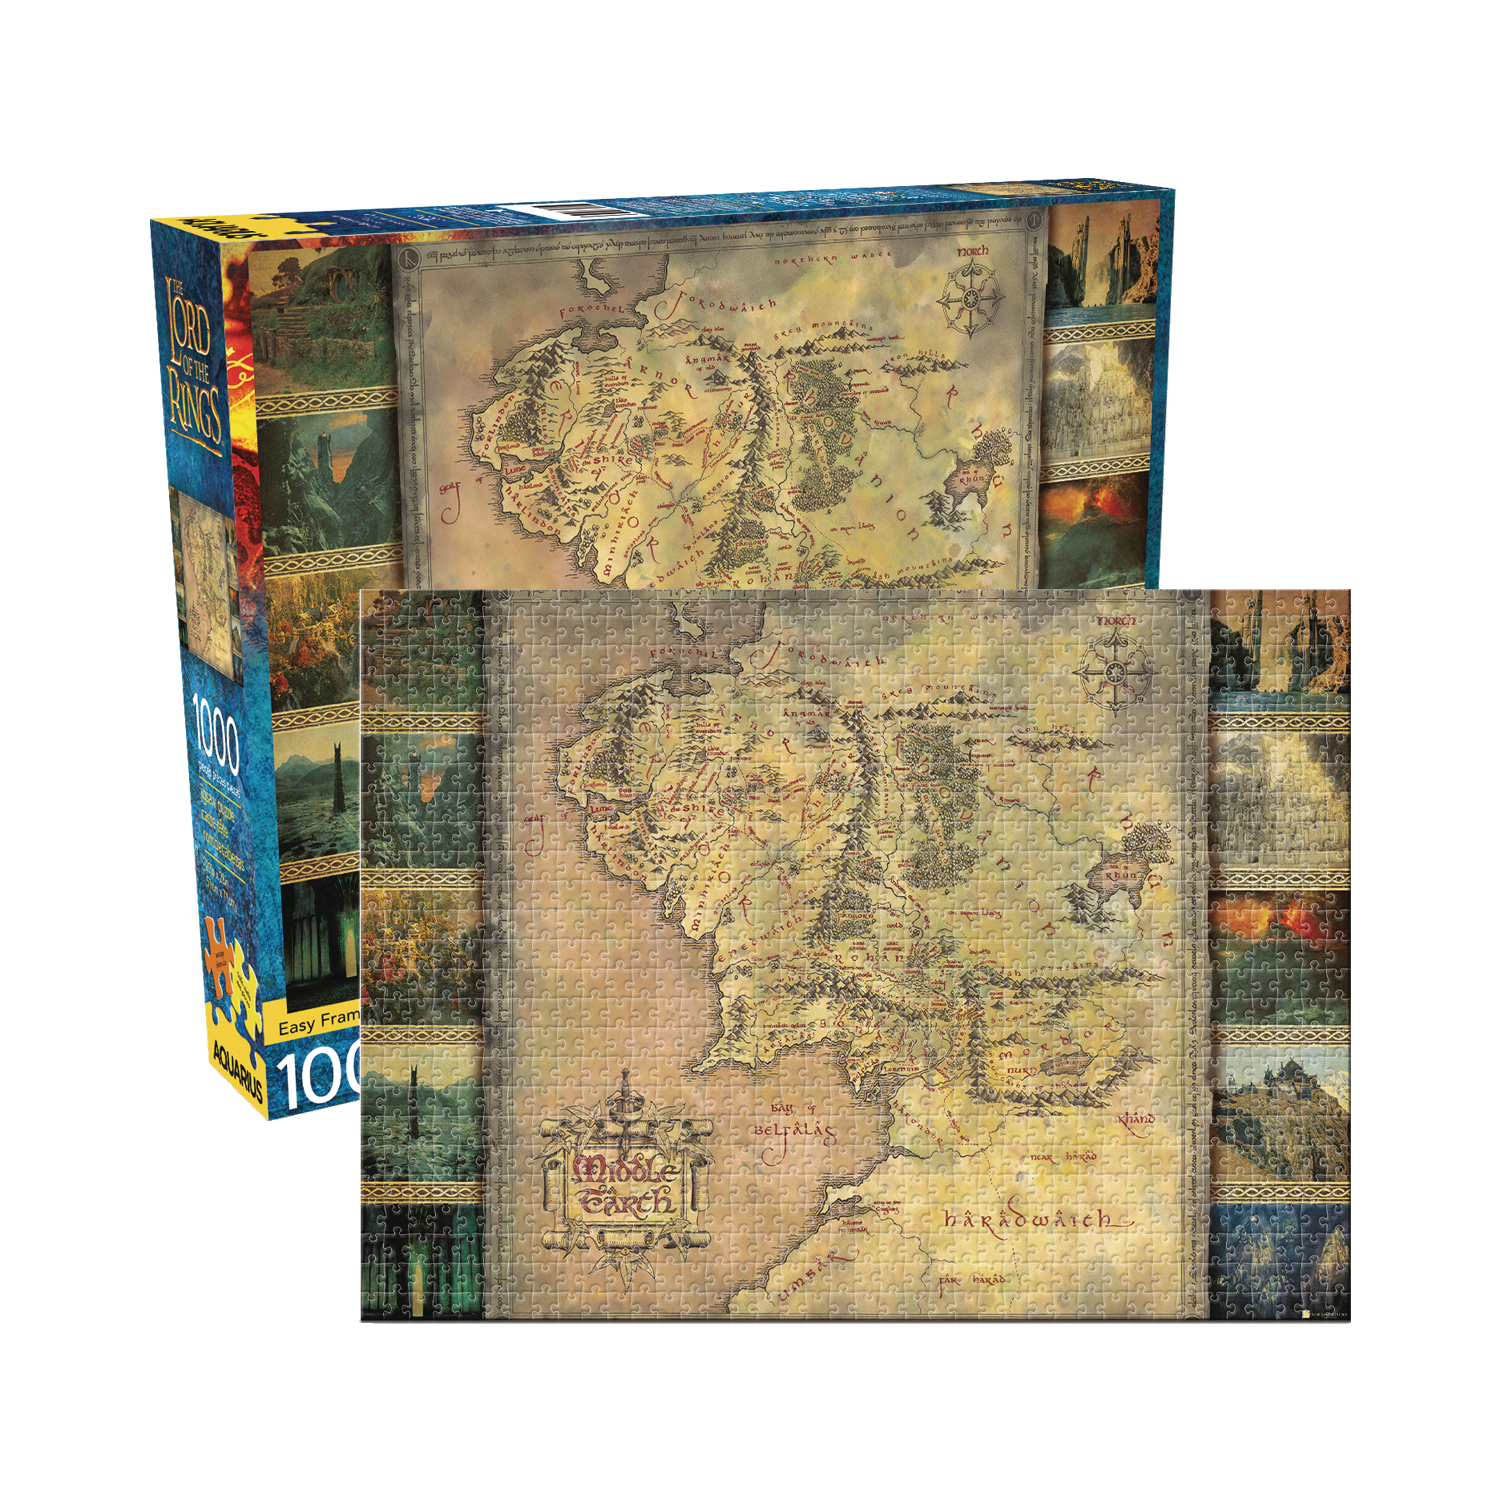 Aquarius Lord of the Rings Map 100 Piece Puzzle